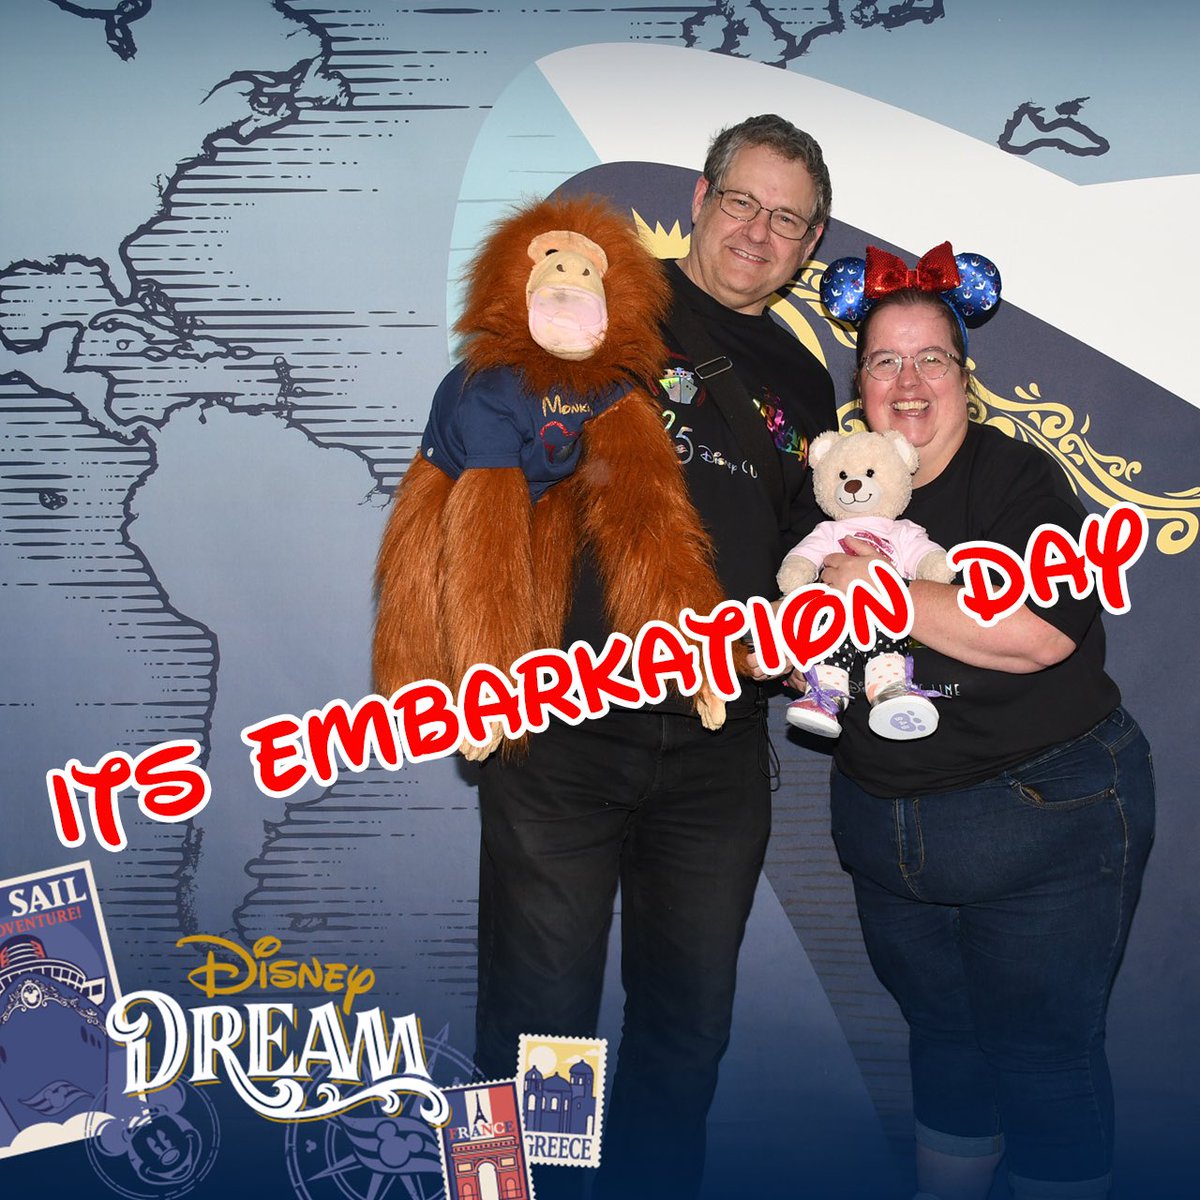 It’s Embarkation day join us at 6pm on the channel tonight where Caz ,Mr Disney,Elsie and that’s naughty monkey as they board the Disney Dream for their 8 night Disney Cruise Adventure #disneydrean #disneycruise #disbeysreamcruise #Cruisevlog #disneyparks